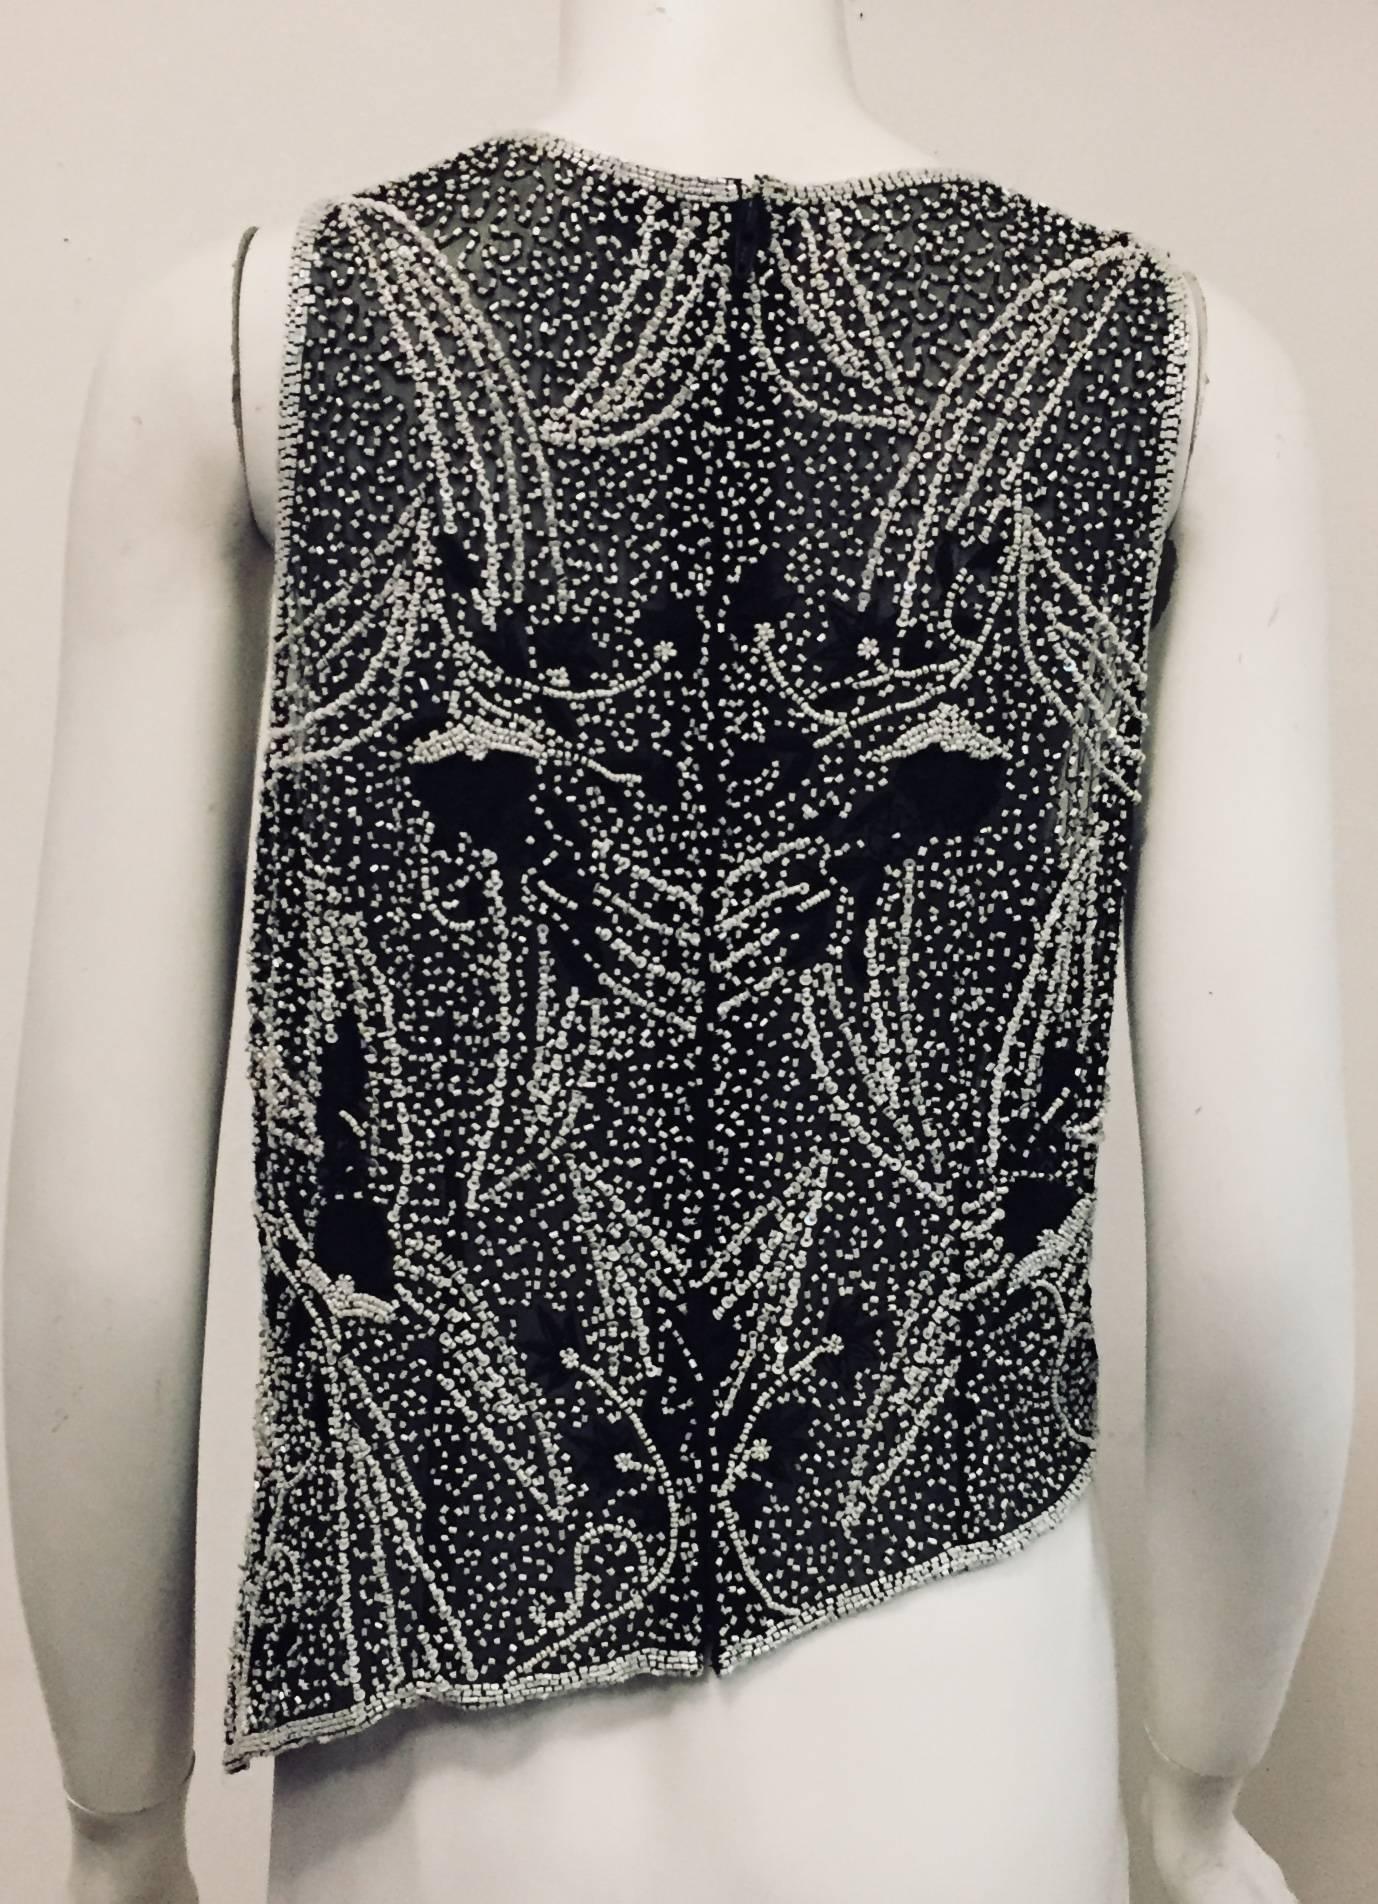 Saint Laurent Black and White Beaded Sleeveless Top with Asymmetric Hem In Excellent Condition For Sale In Palm Beach, FL